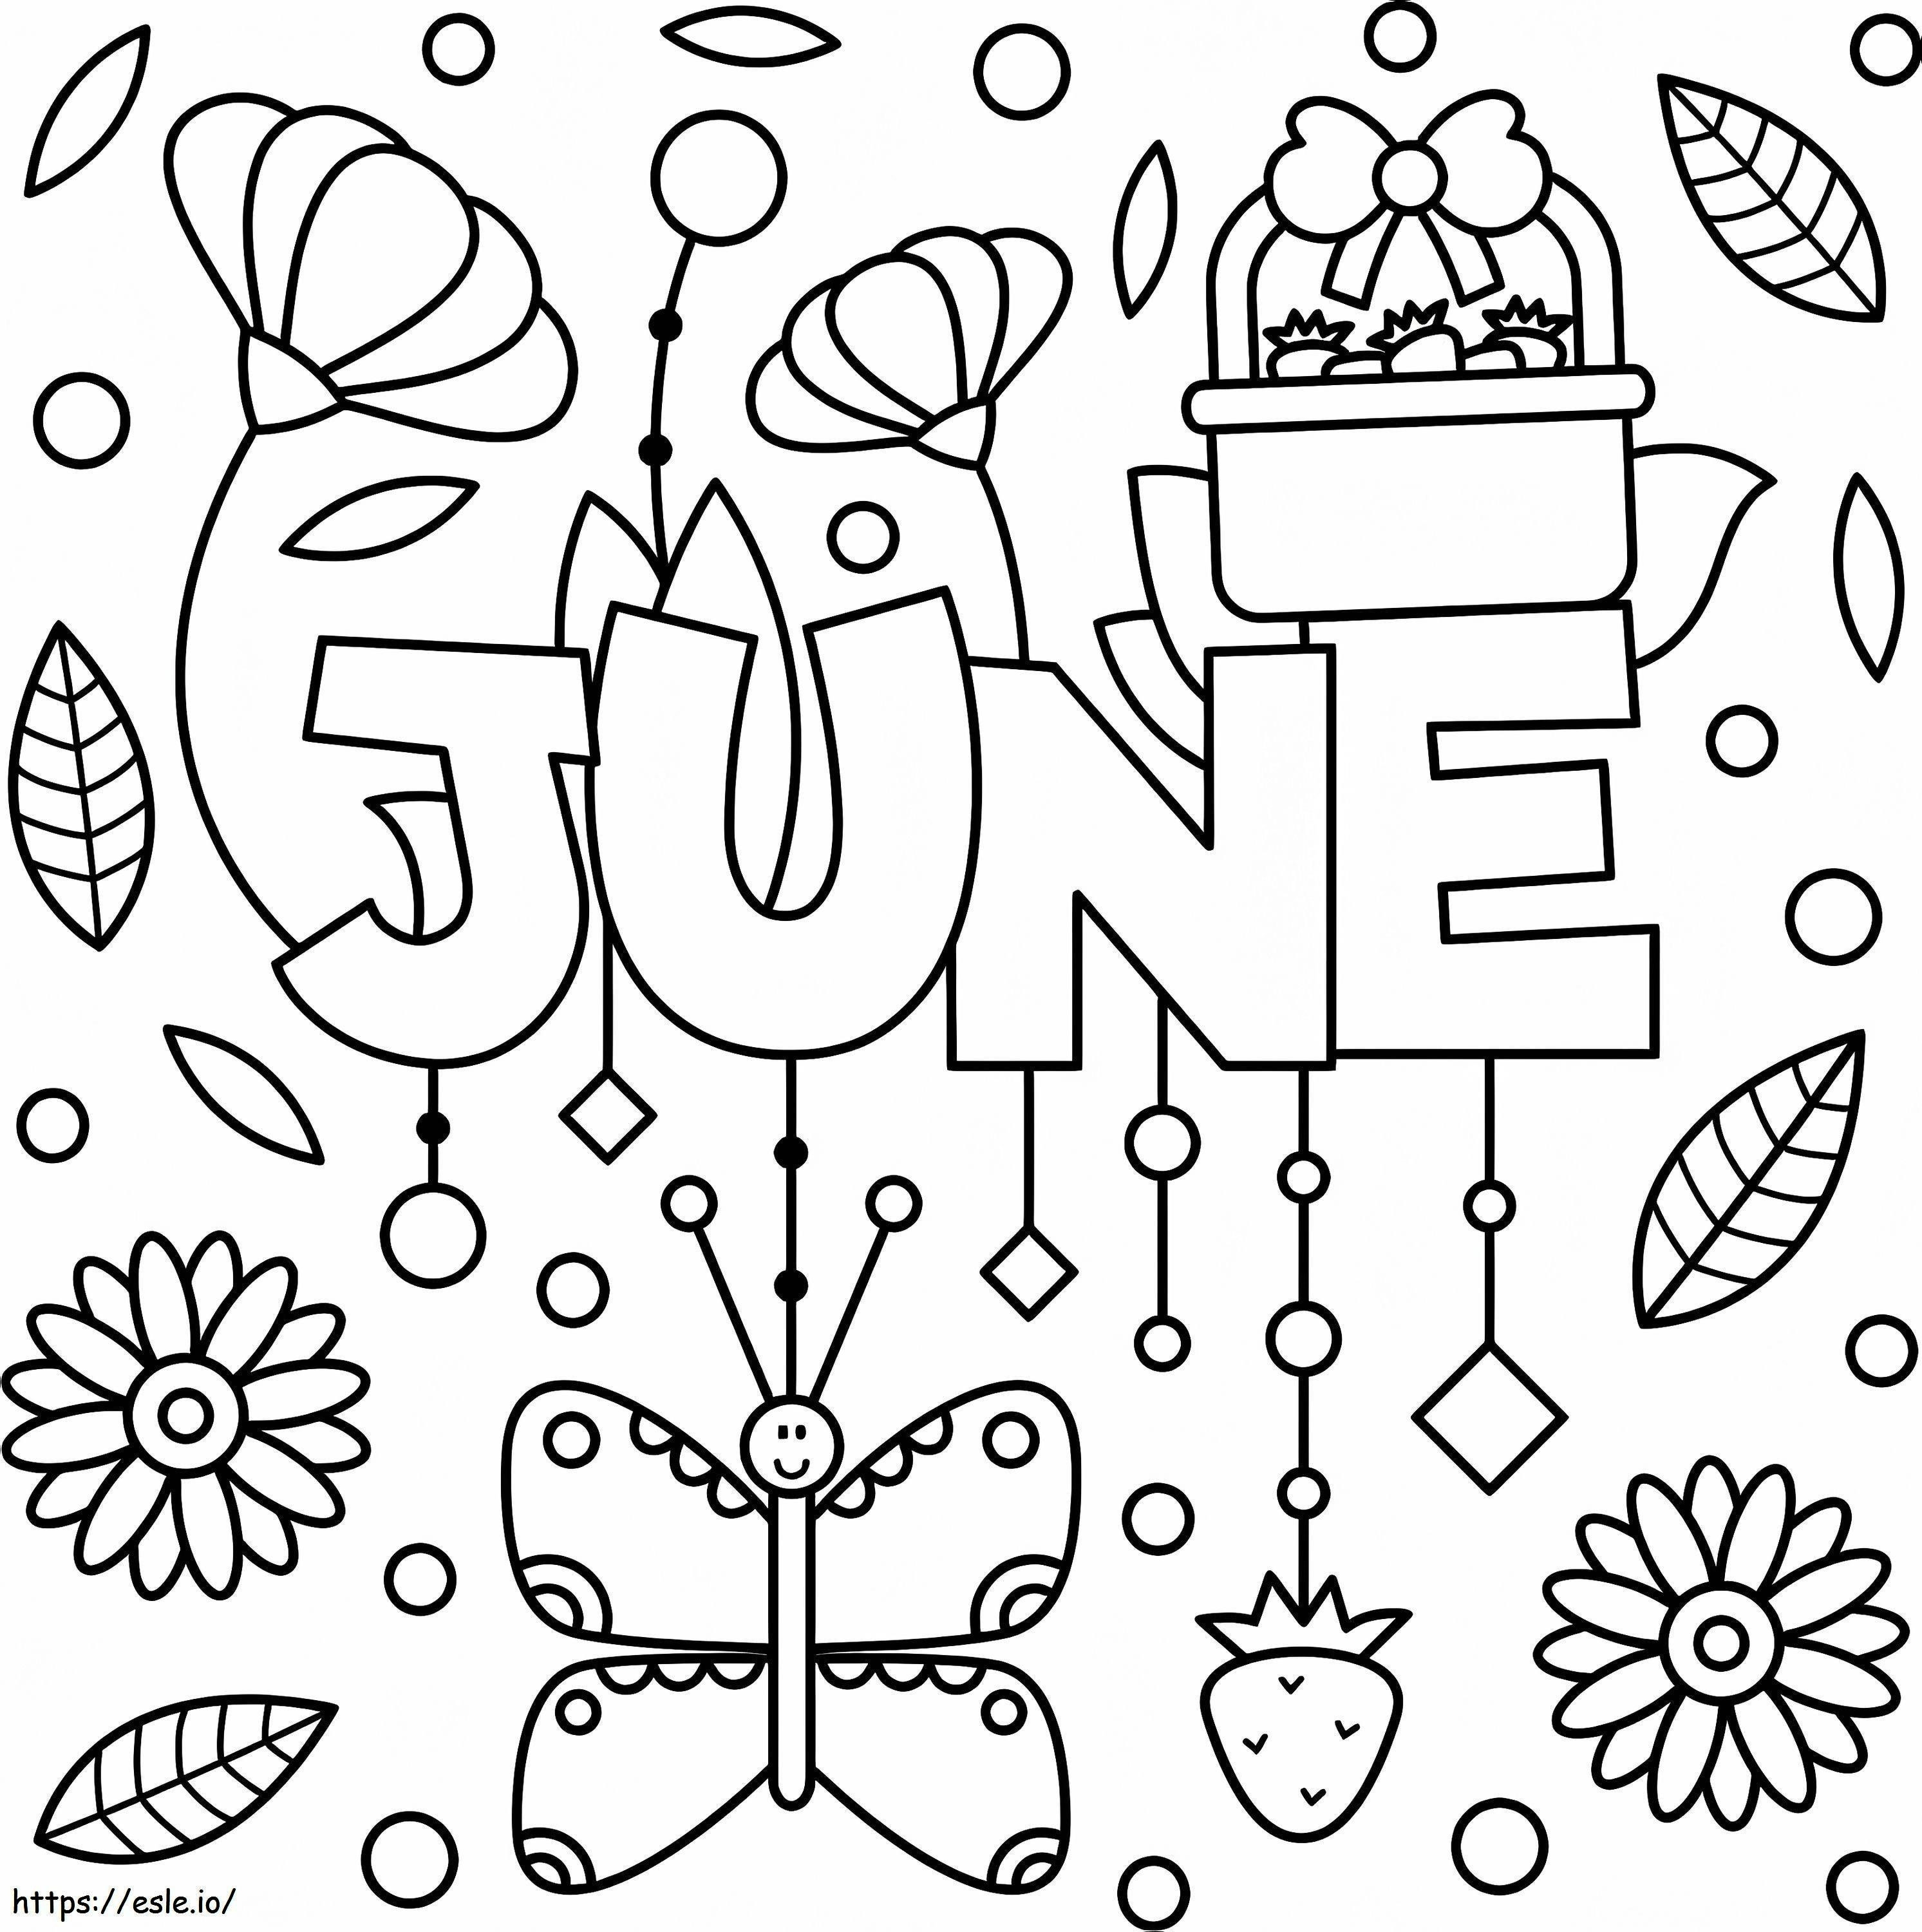 Lovely June coloring page